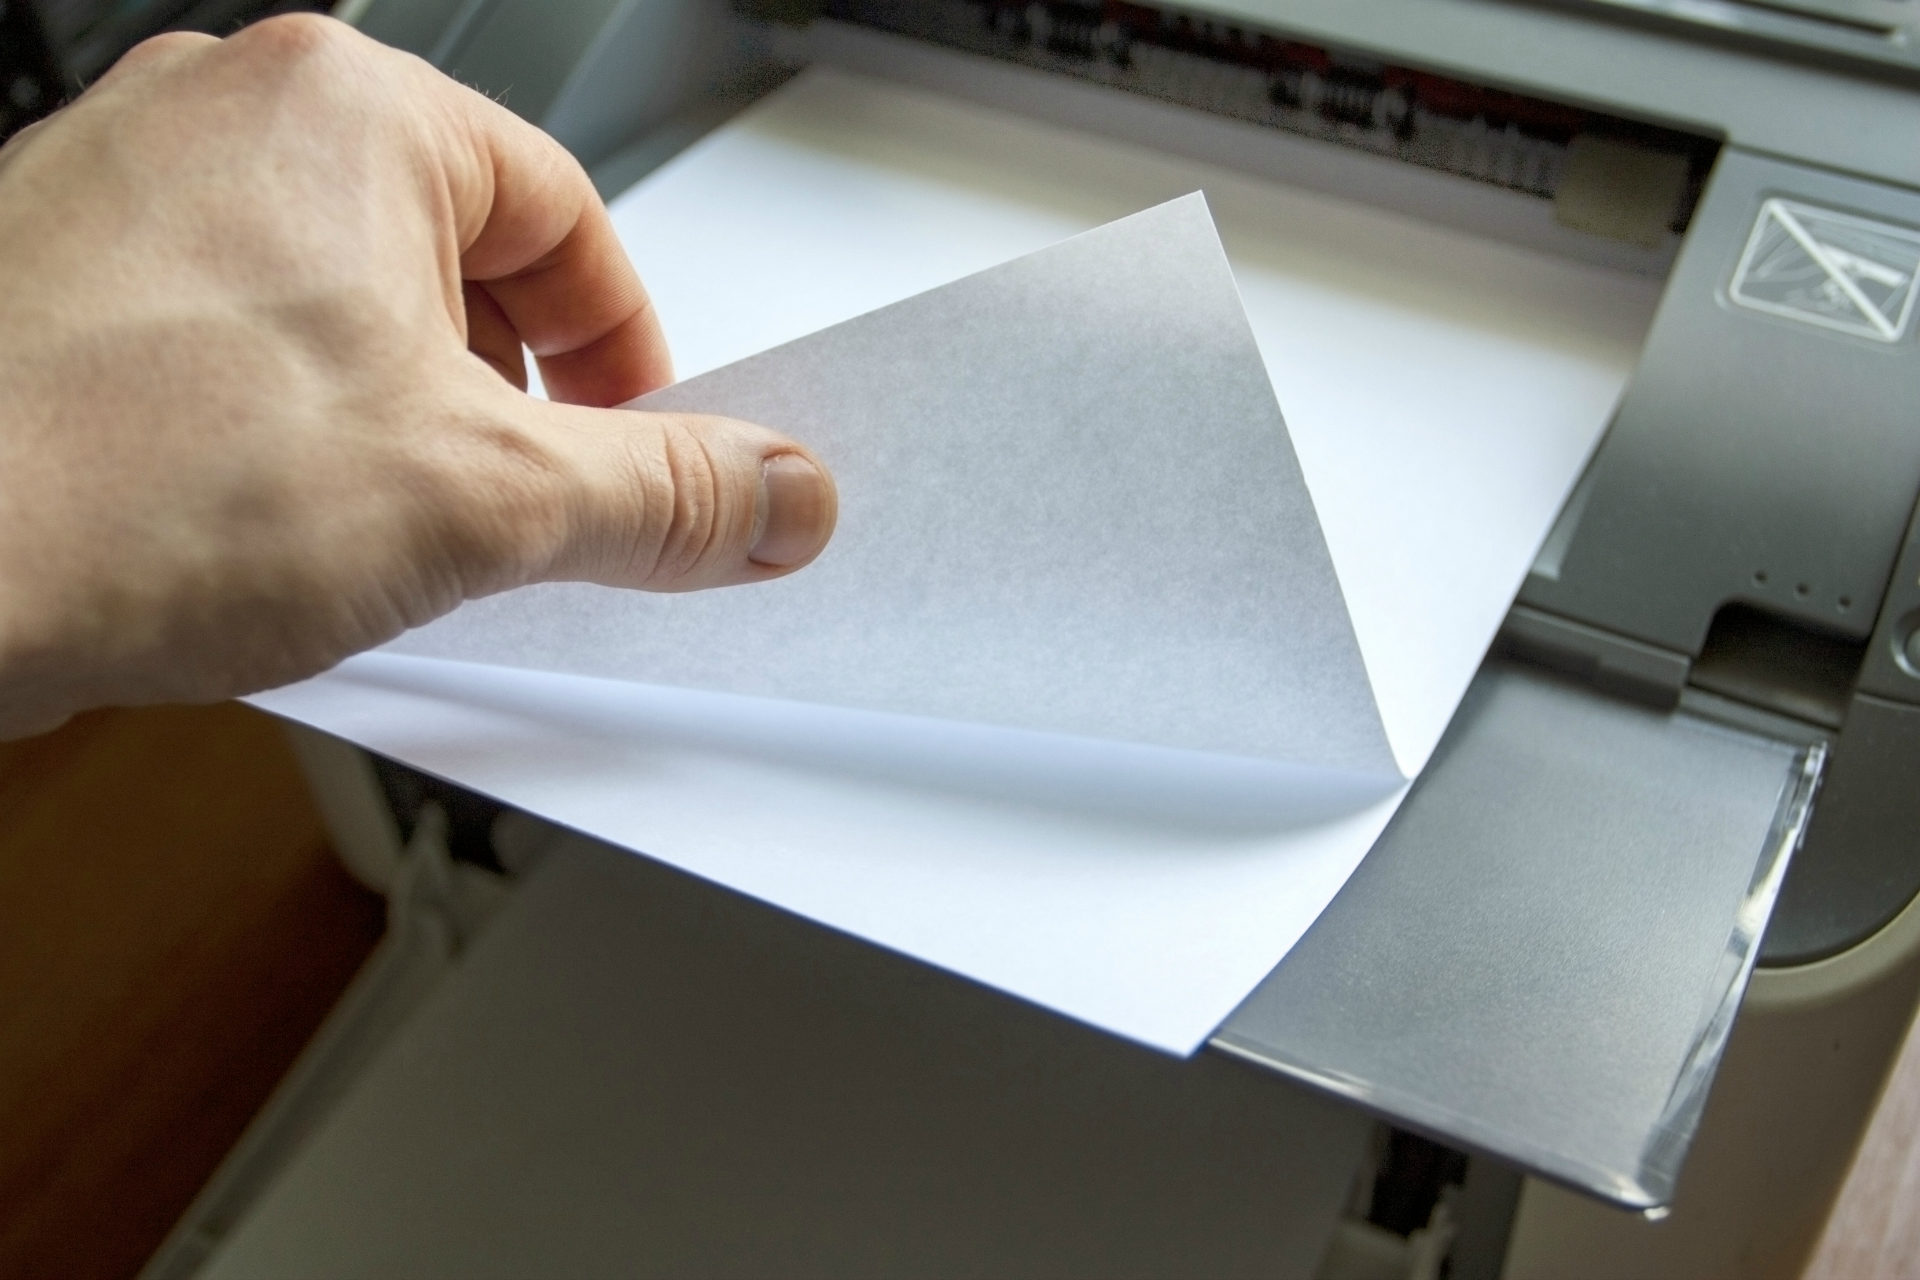 guy removing paper from printer